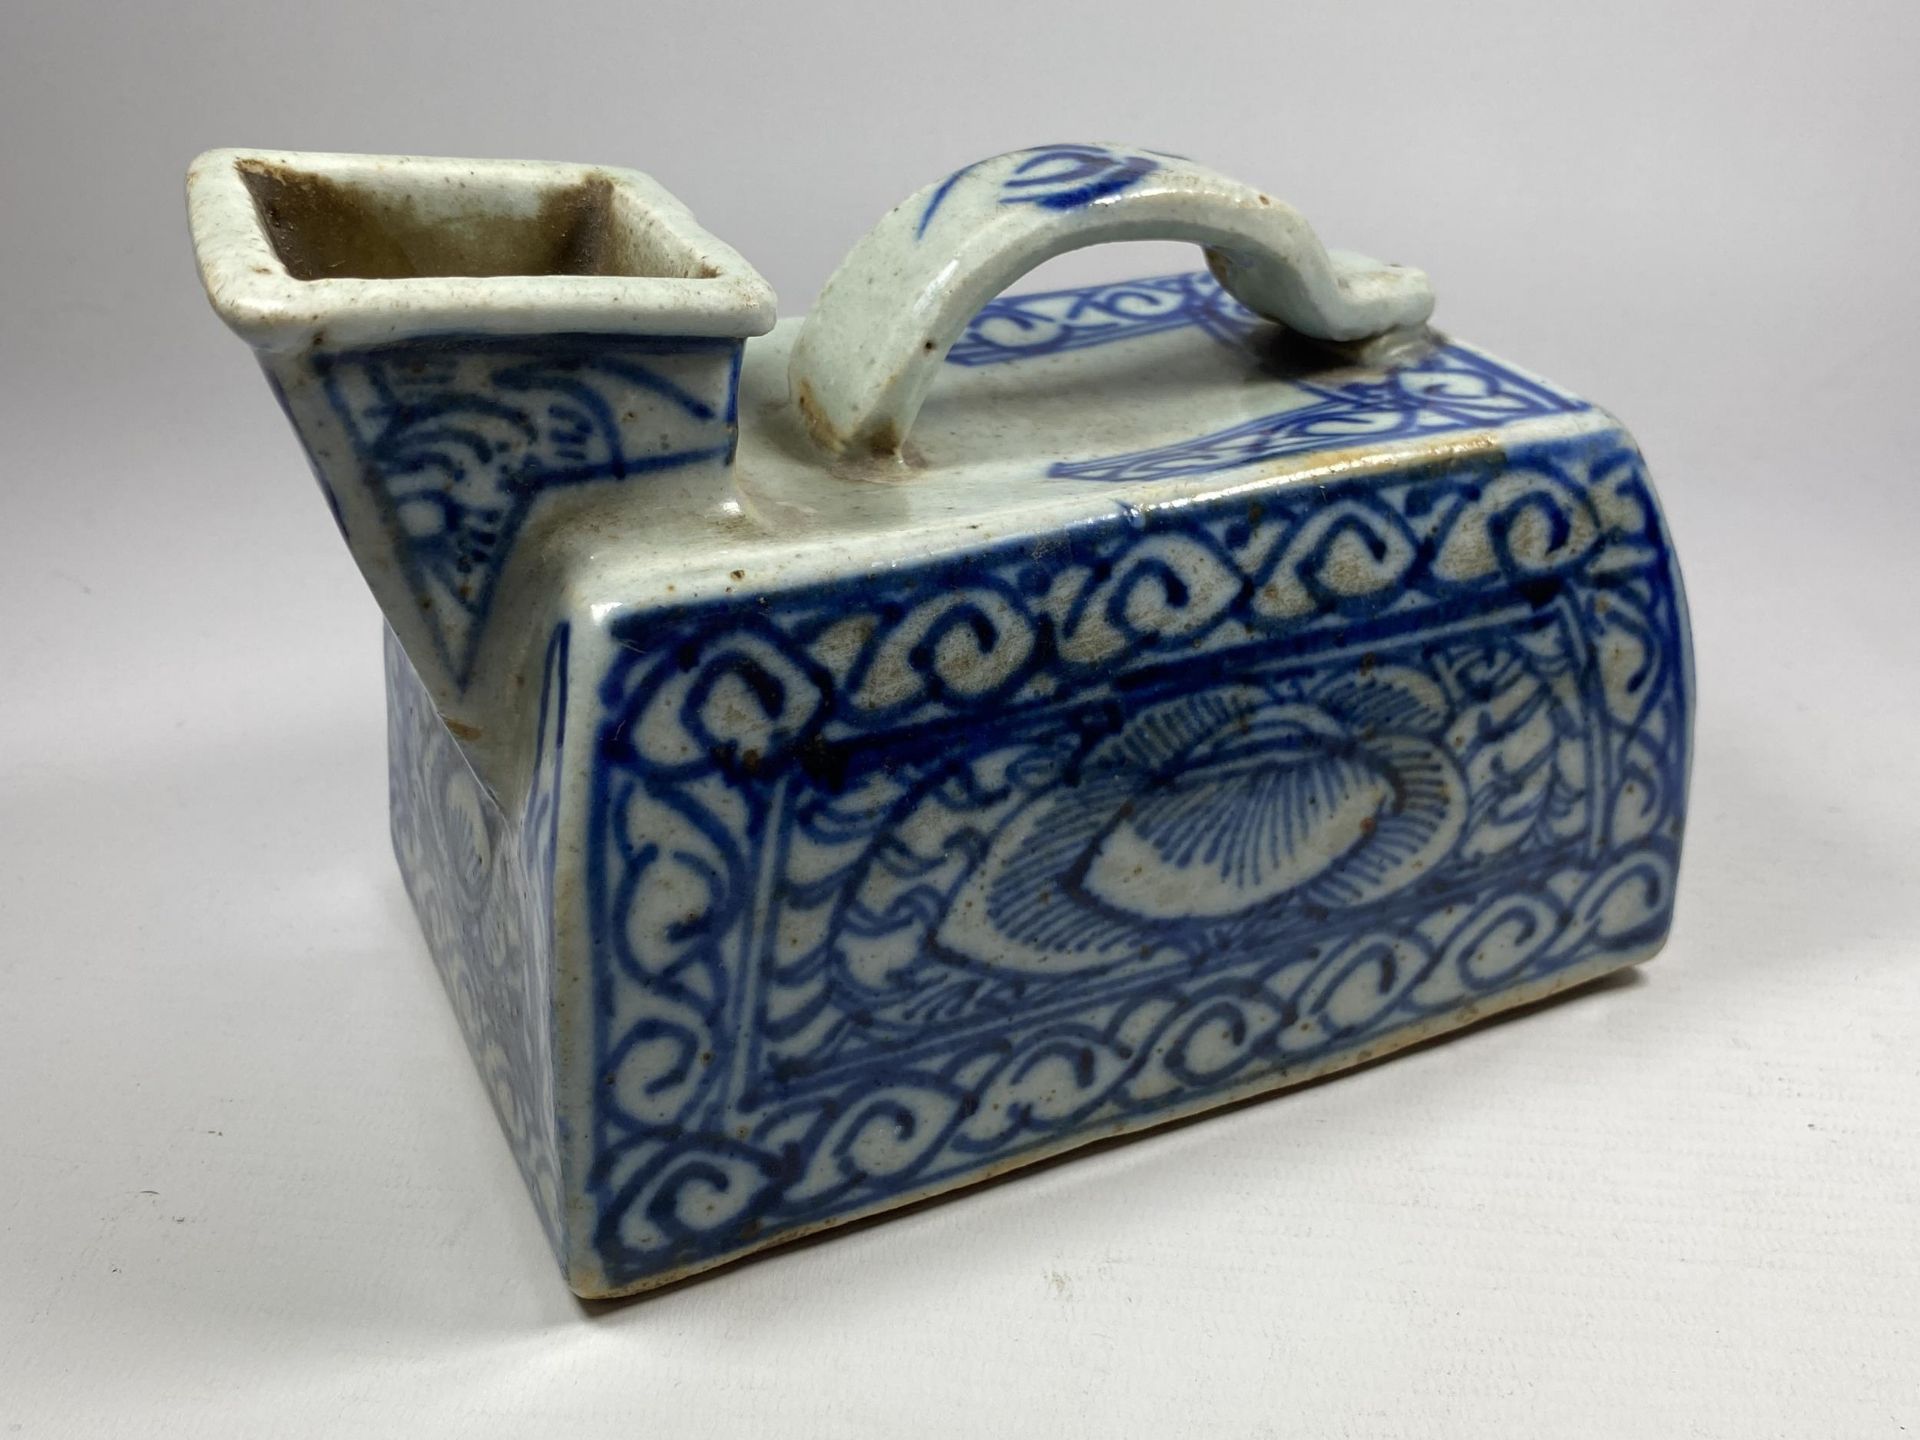 A 19TH CENTURY MING STYLE CHINESE BLUE AND WHITE WATER CARRIER / VESSEL, LENGTH 18CM - Image 2 of 3